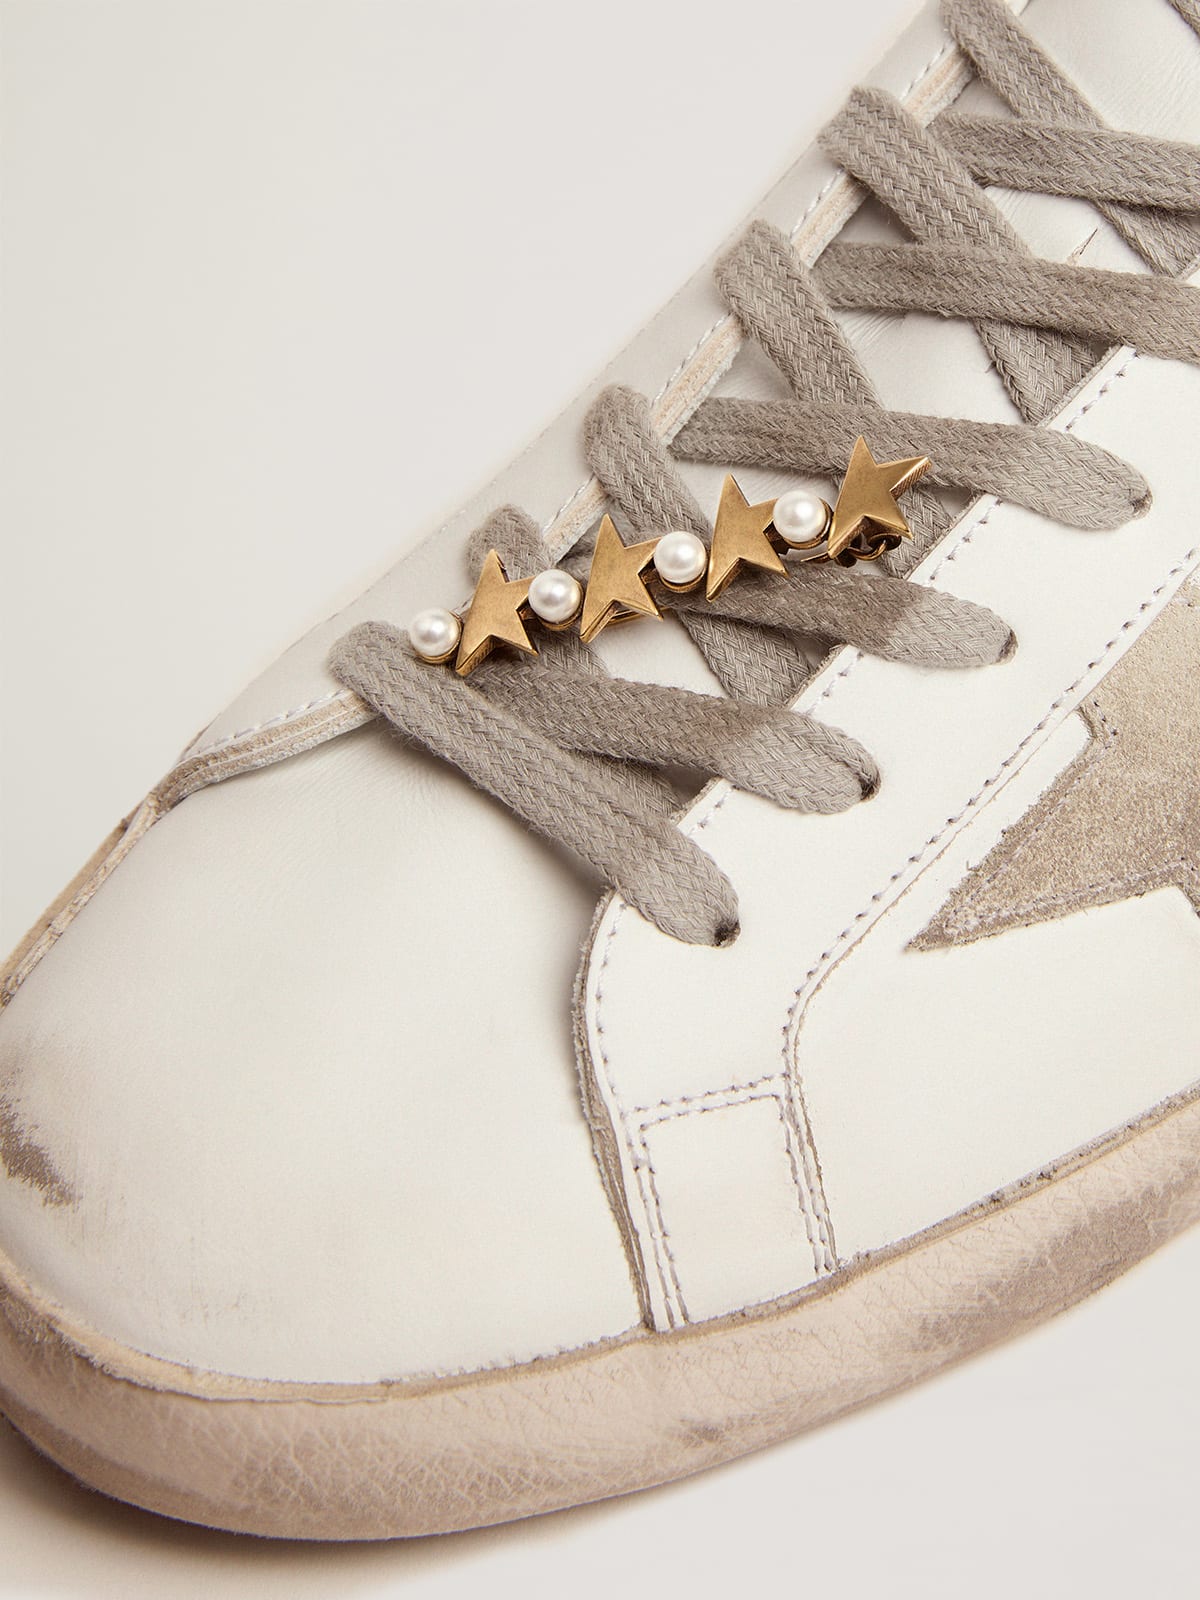 Golden Goose - Heritage Jewelmates Collection lace lock in old gold color with decorative beads in 